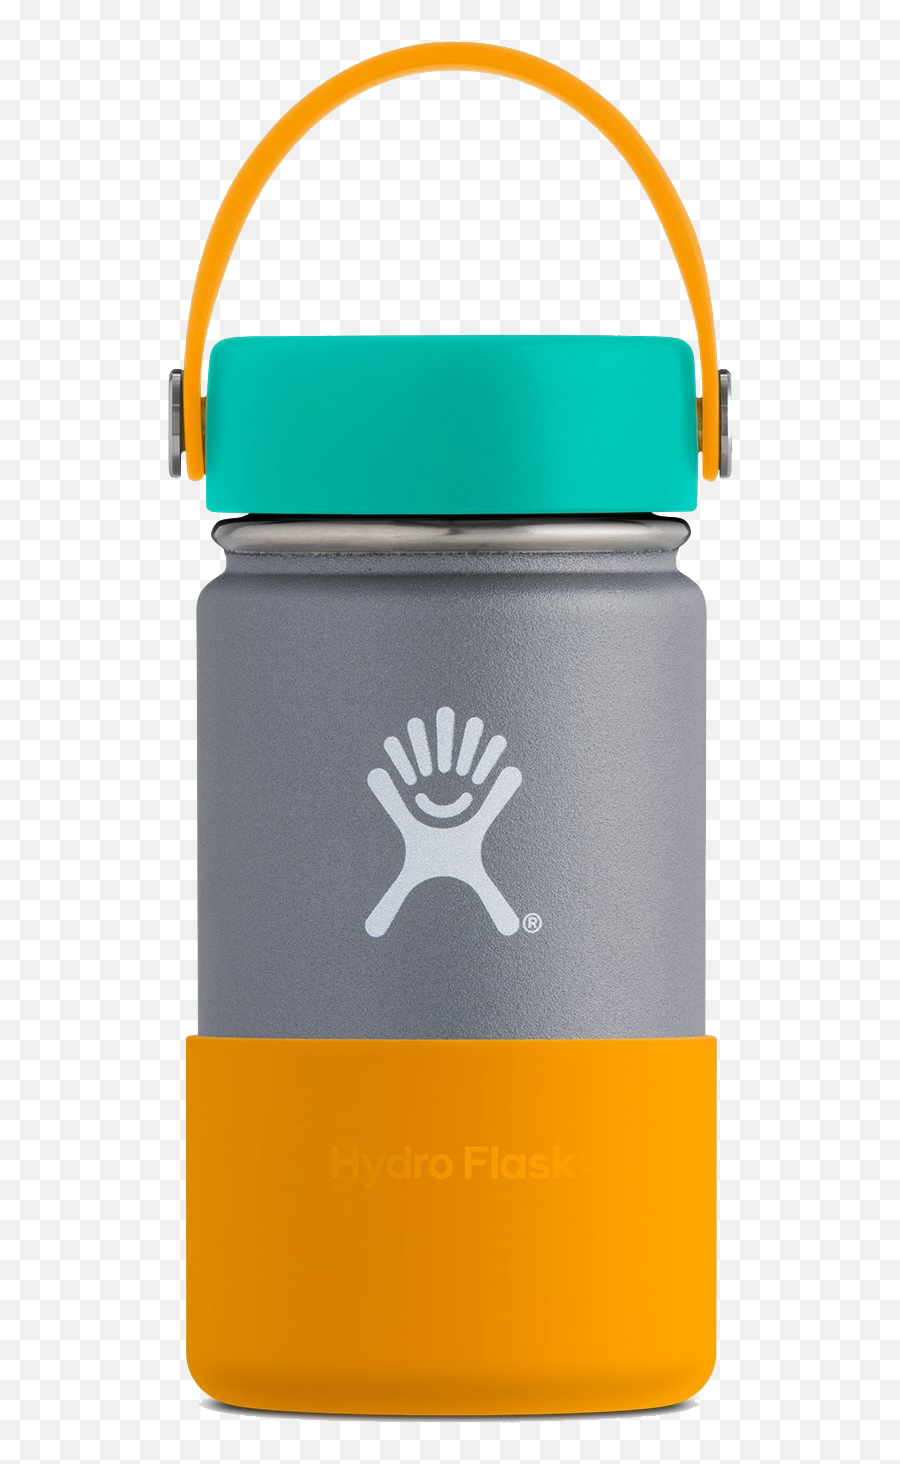 Hydro Flask Png Clipart Png Mart Emoji,Hydro Flask Png